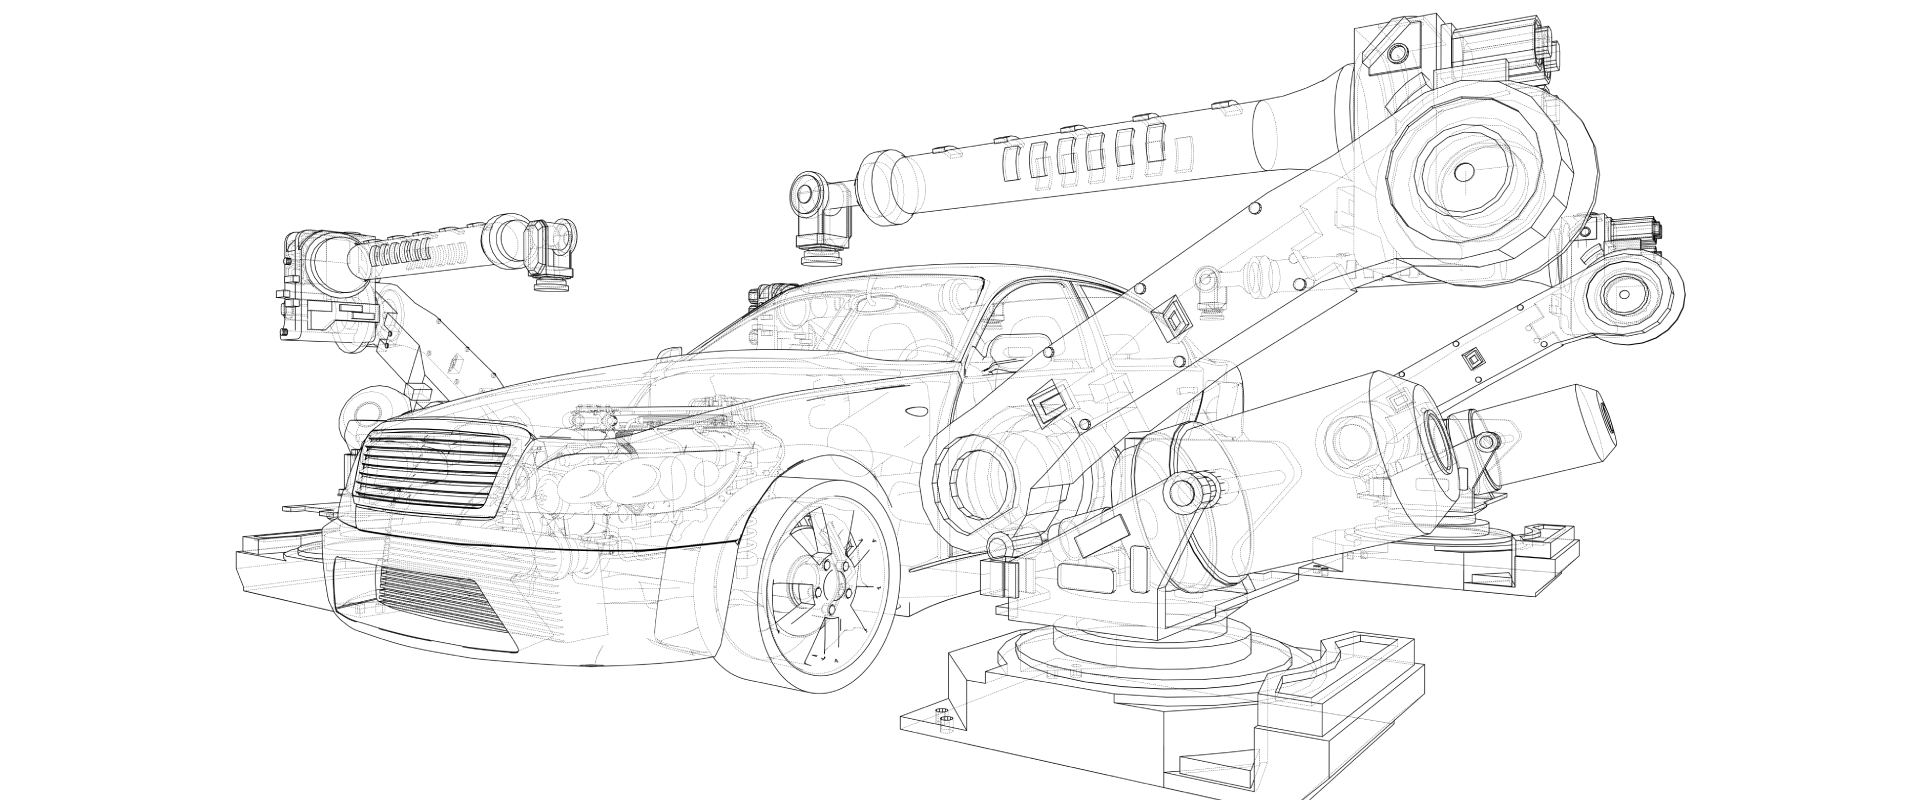 Assembly of motor vehicle. Robotic equipment makes Assembly of car. Blueprint style. Vector rendering from 3D model